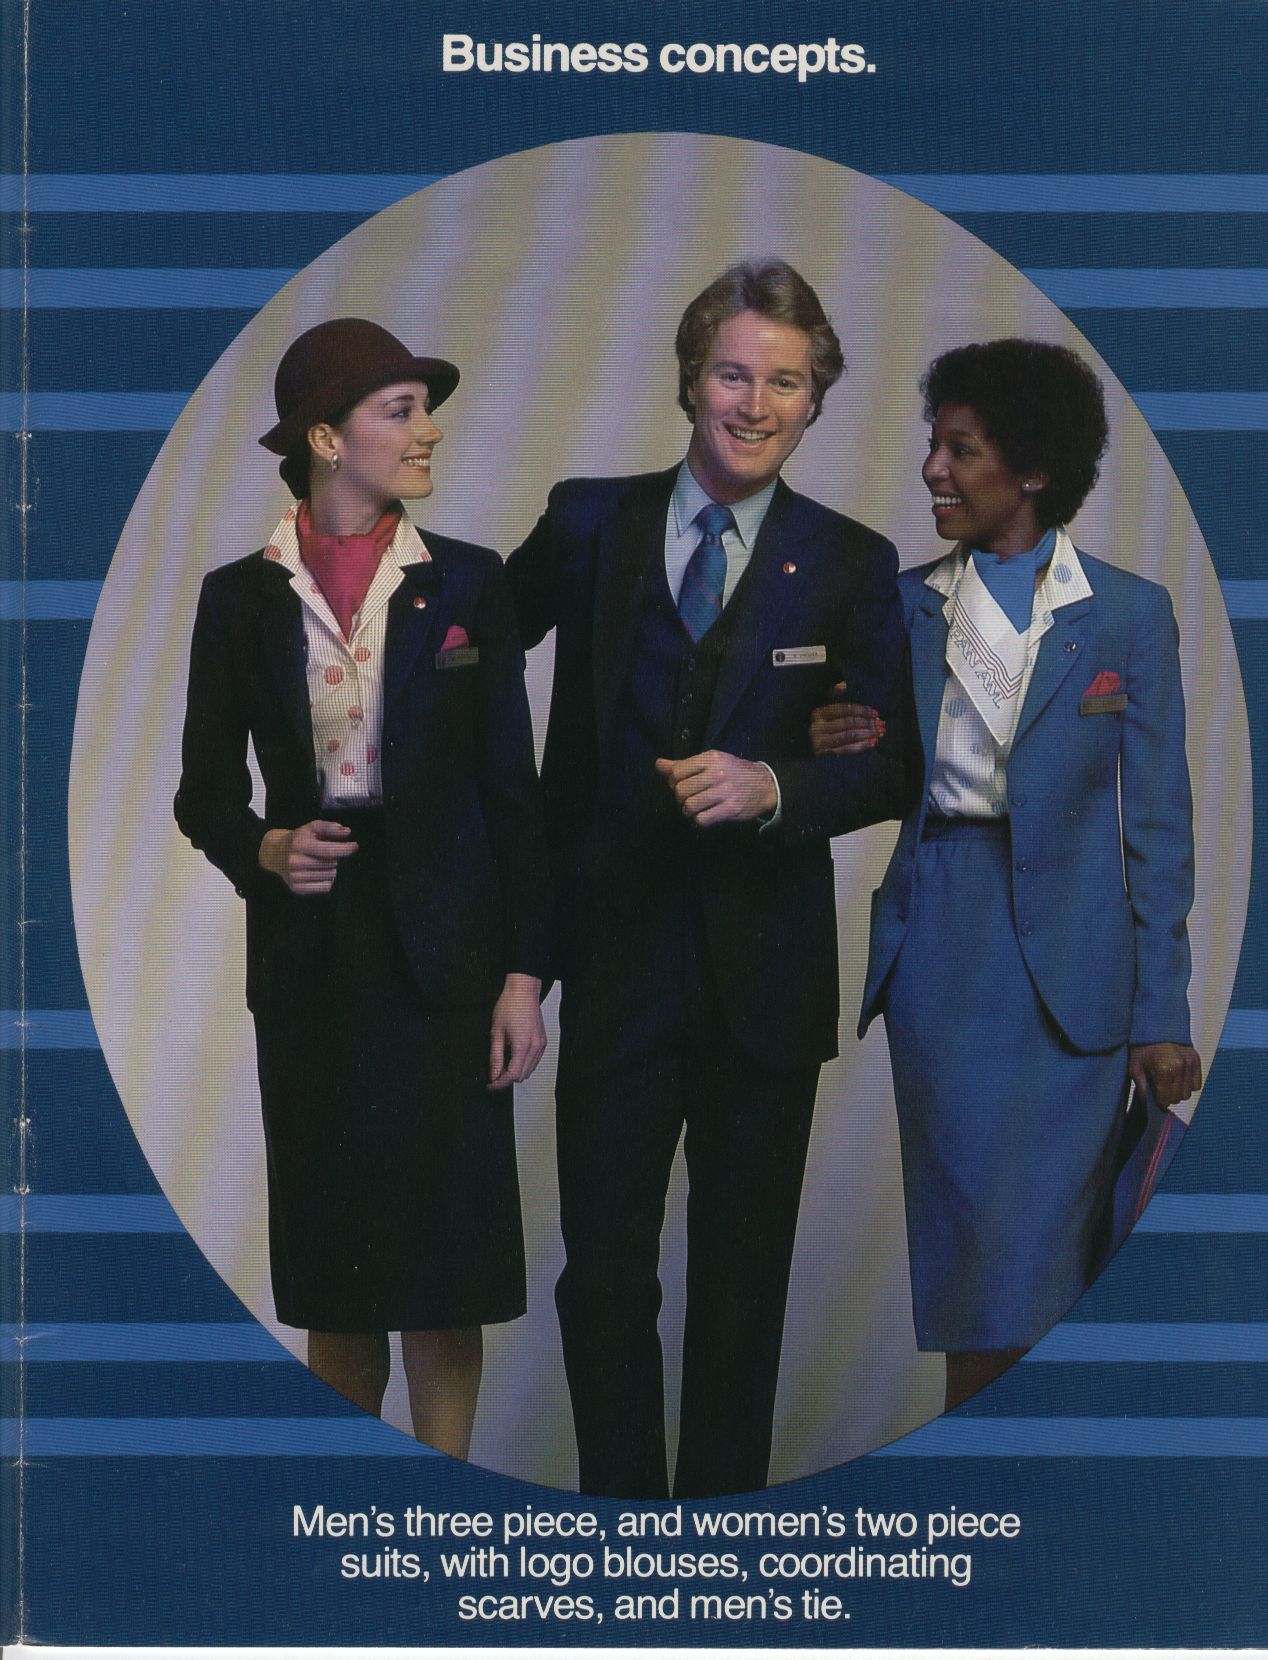 1980, July, Pan Am introduced new flight service and Passenger service (ground staff) uniforms in July of 1980.  This picture shows the  Passenger Service uniforms designed by French designer Jean Cacharel.